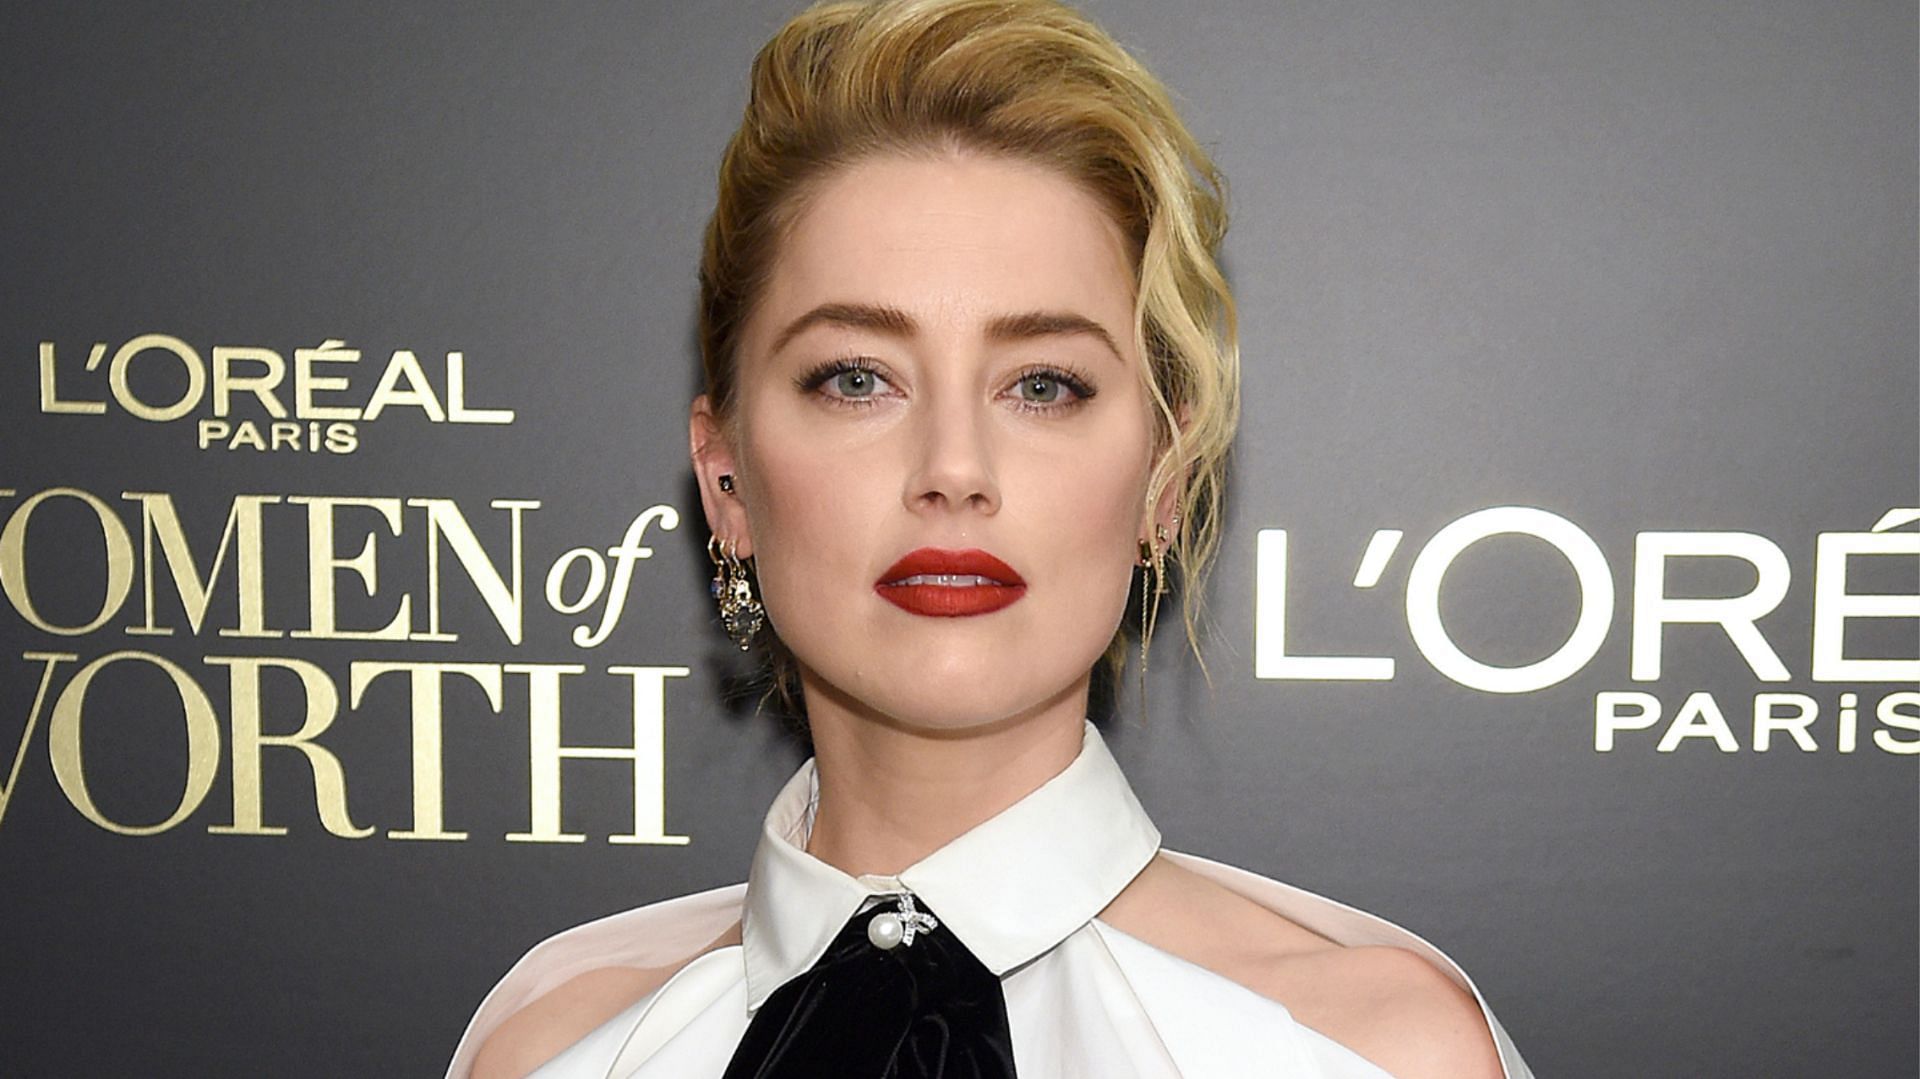 Amber Heard appeared in an episode of Criminal Minds in its first season (Image via Getty Images/Lawrence Busacca)